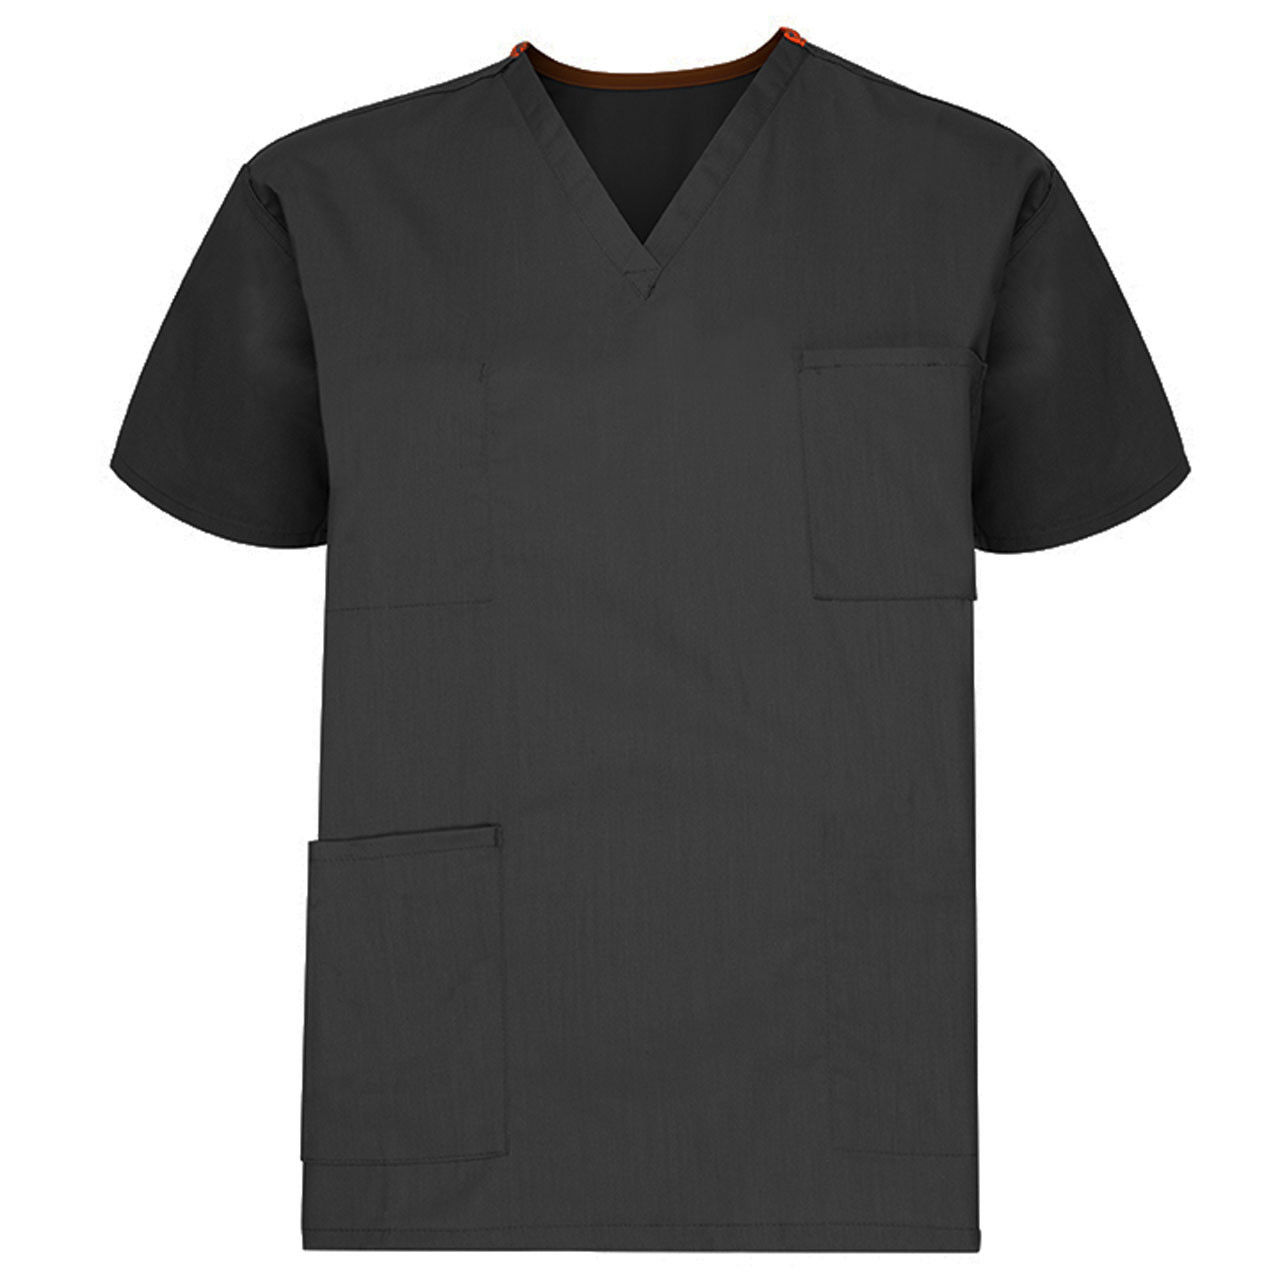 What's the method to find the right alpha-size for reversible scrubs?